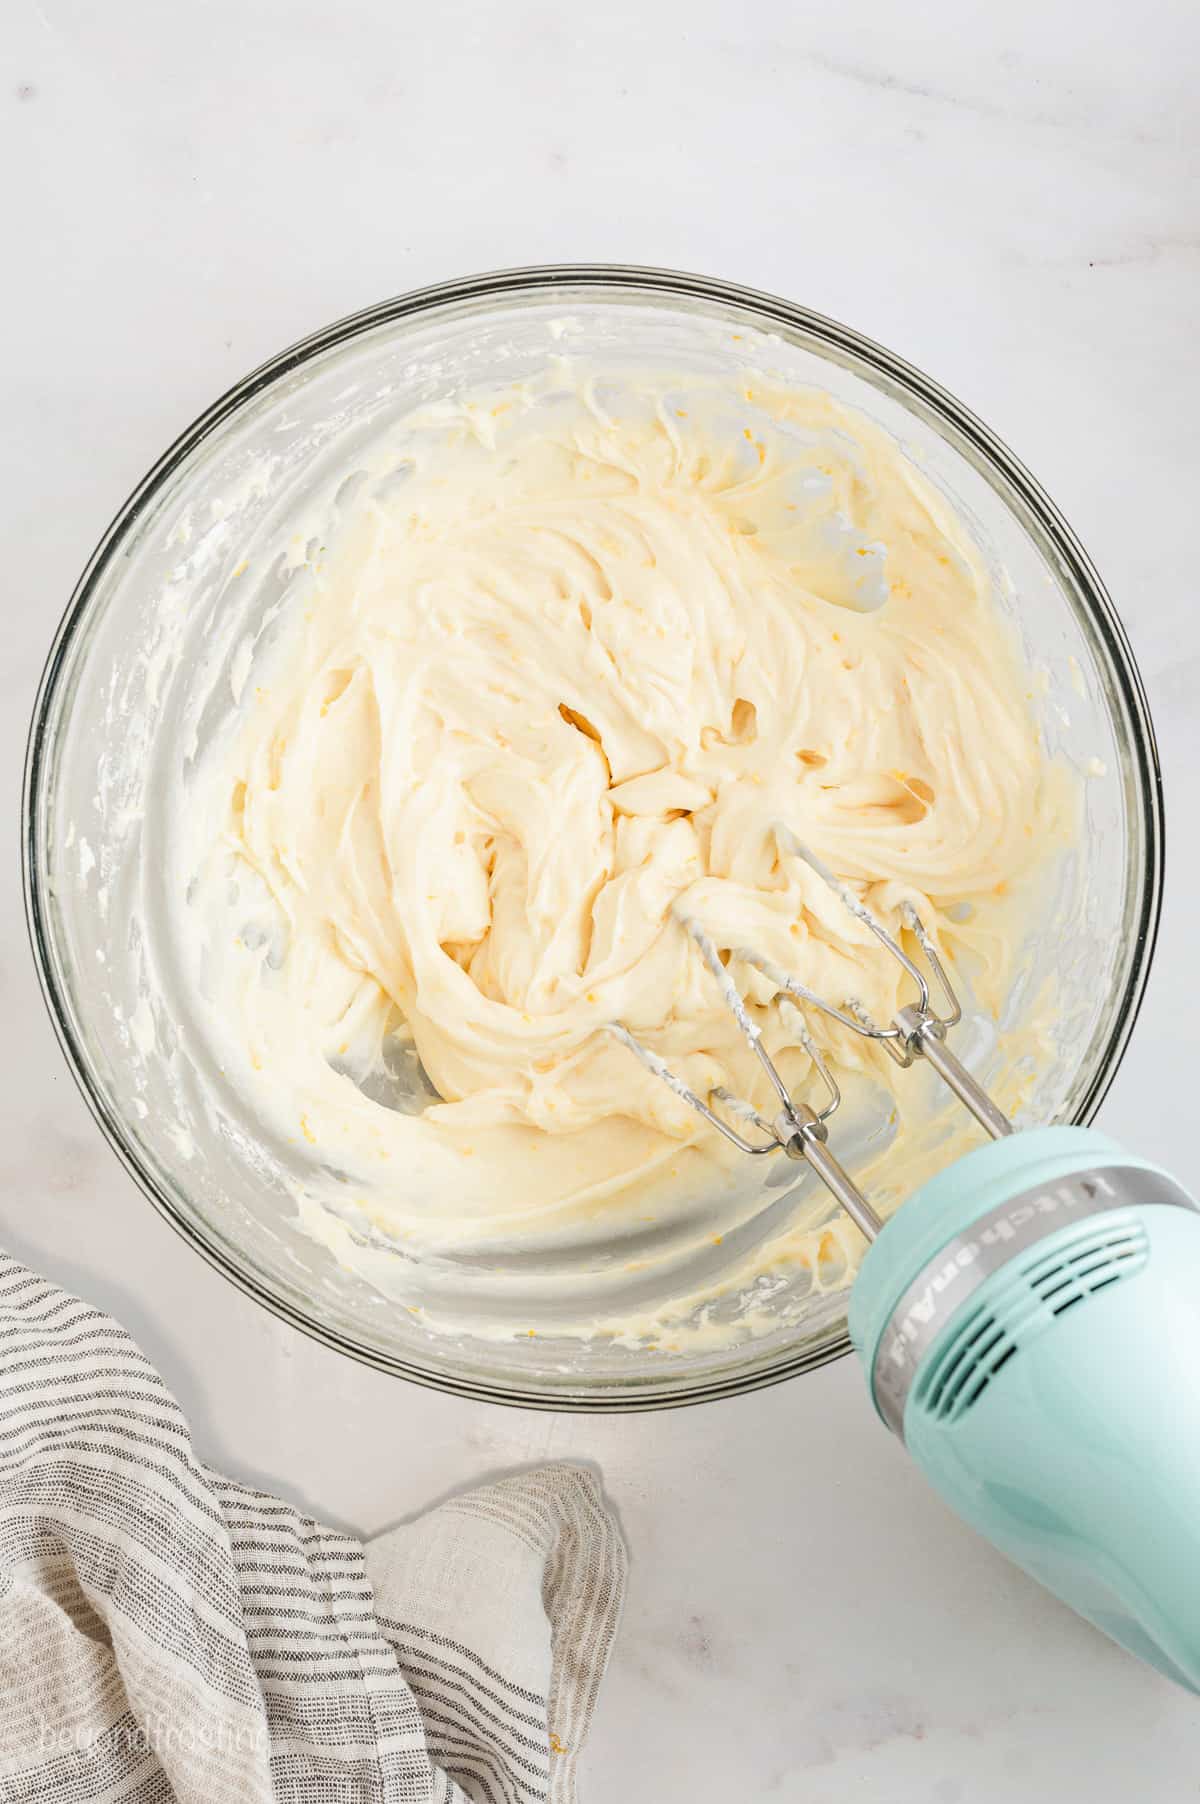 A hand mixer resting in a glass bowl of whipped orange icing.